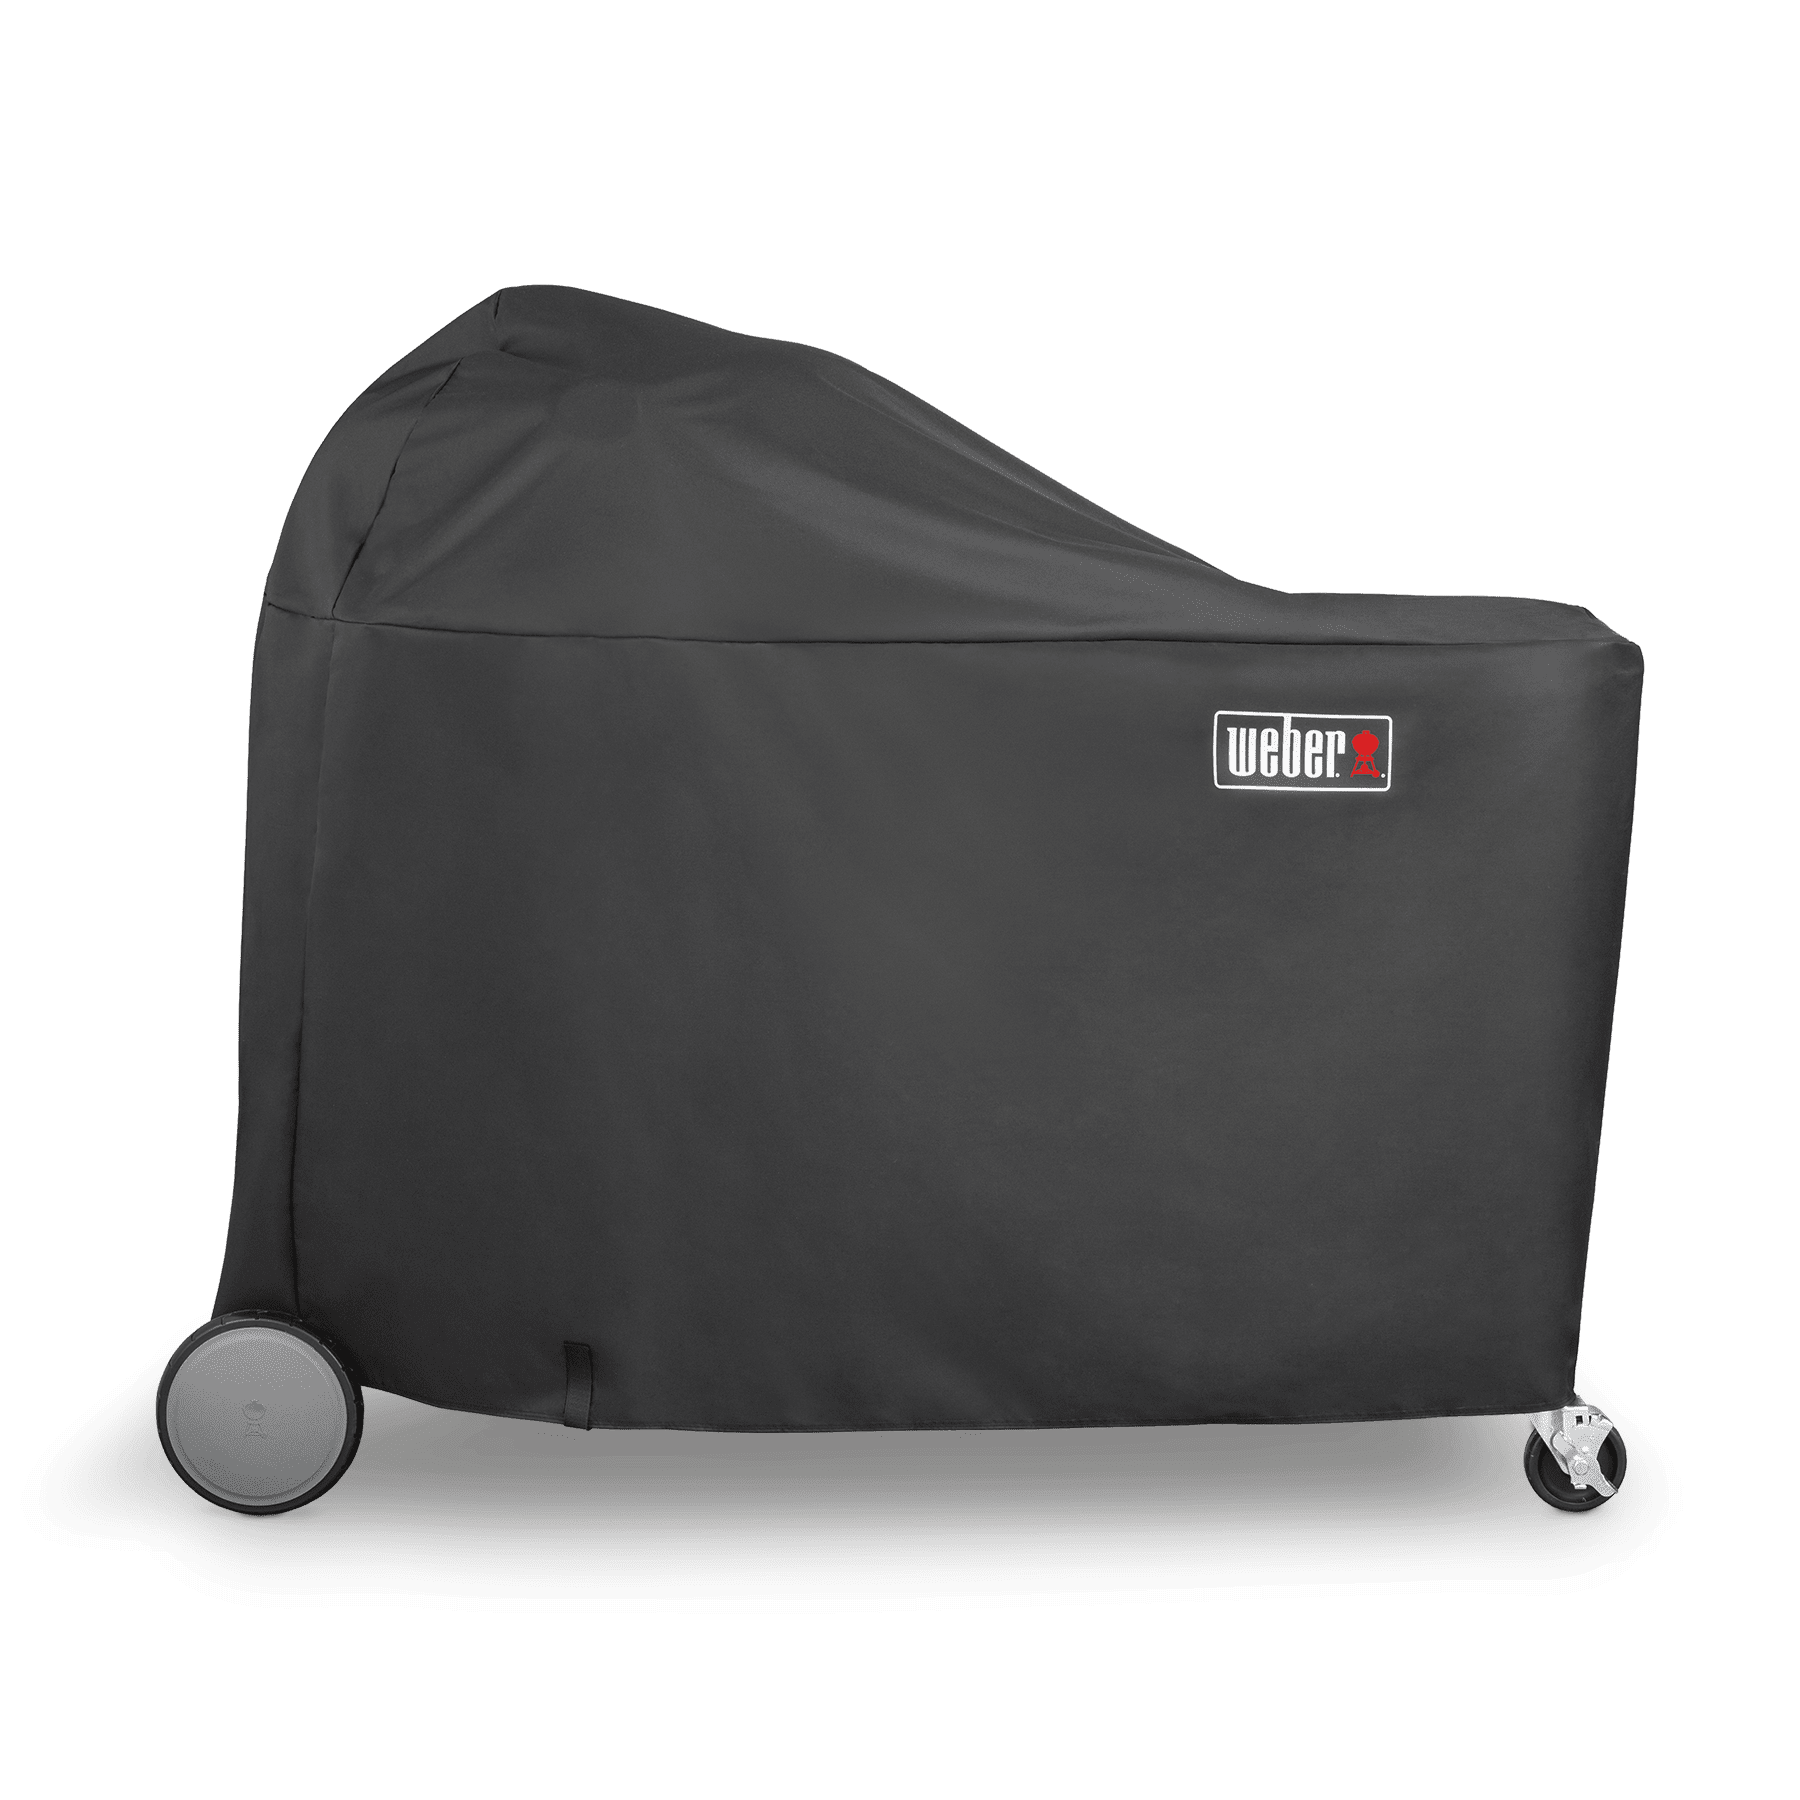 Weber Premium Grill Cover - Summit Charcoal Grilling Centre 7174 Media 1 of 1